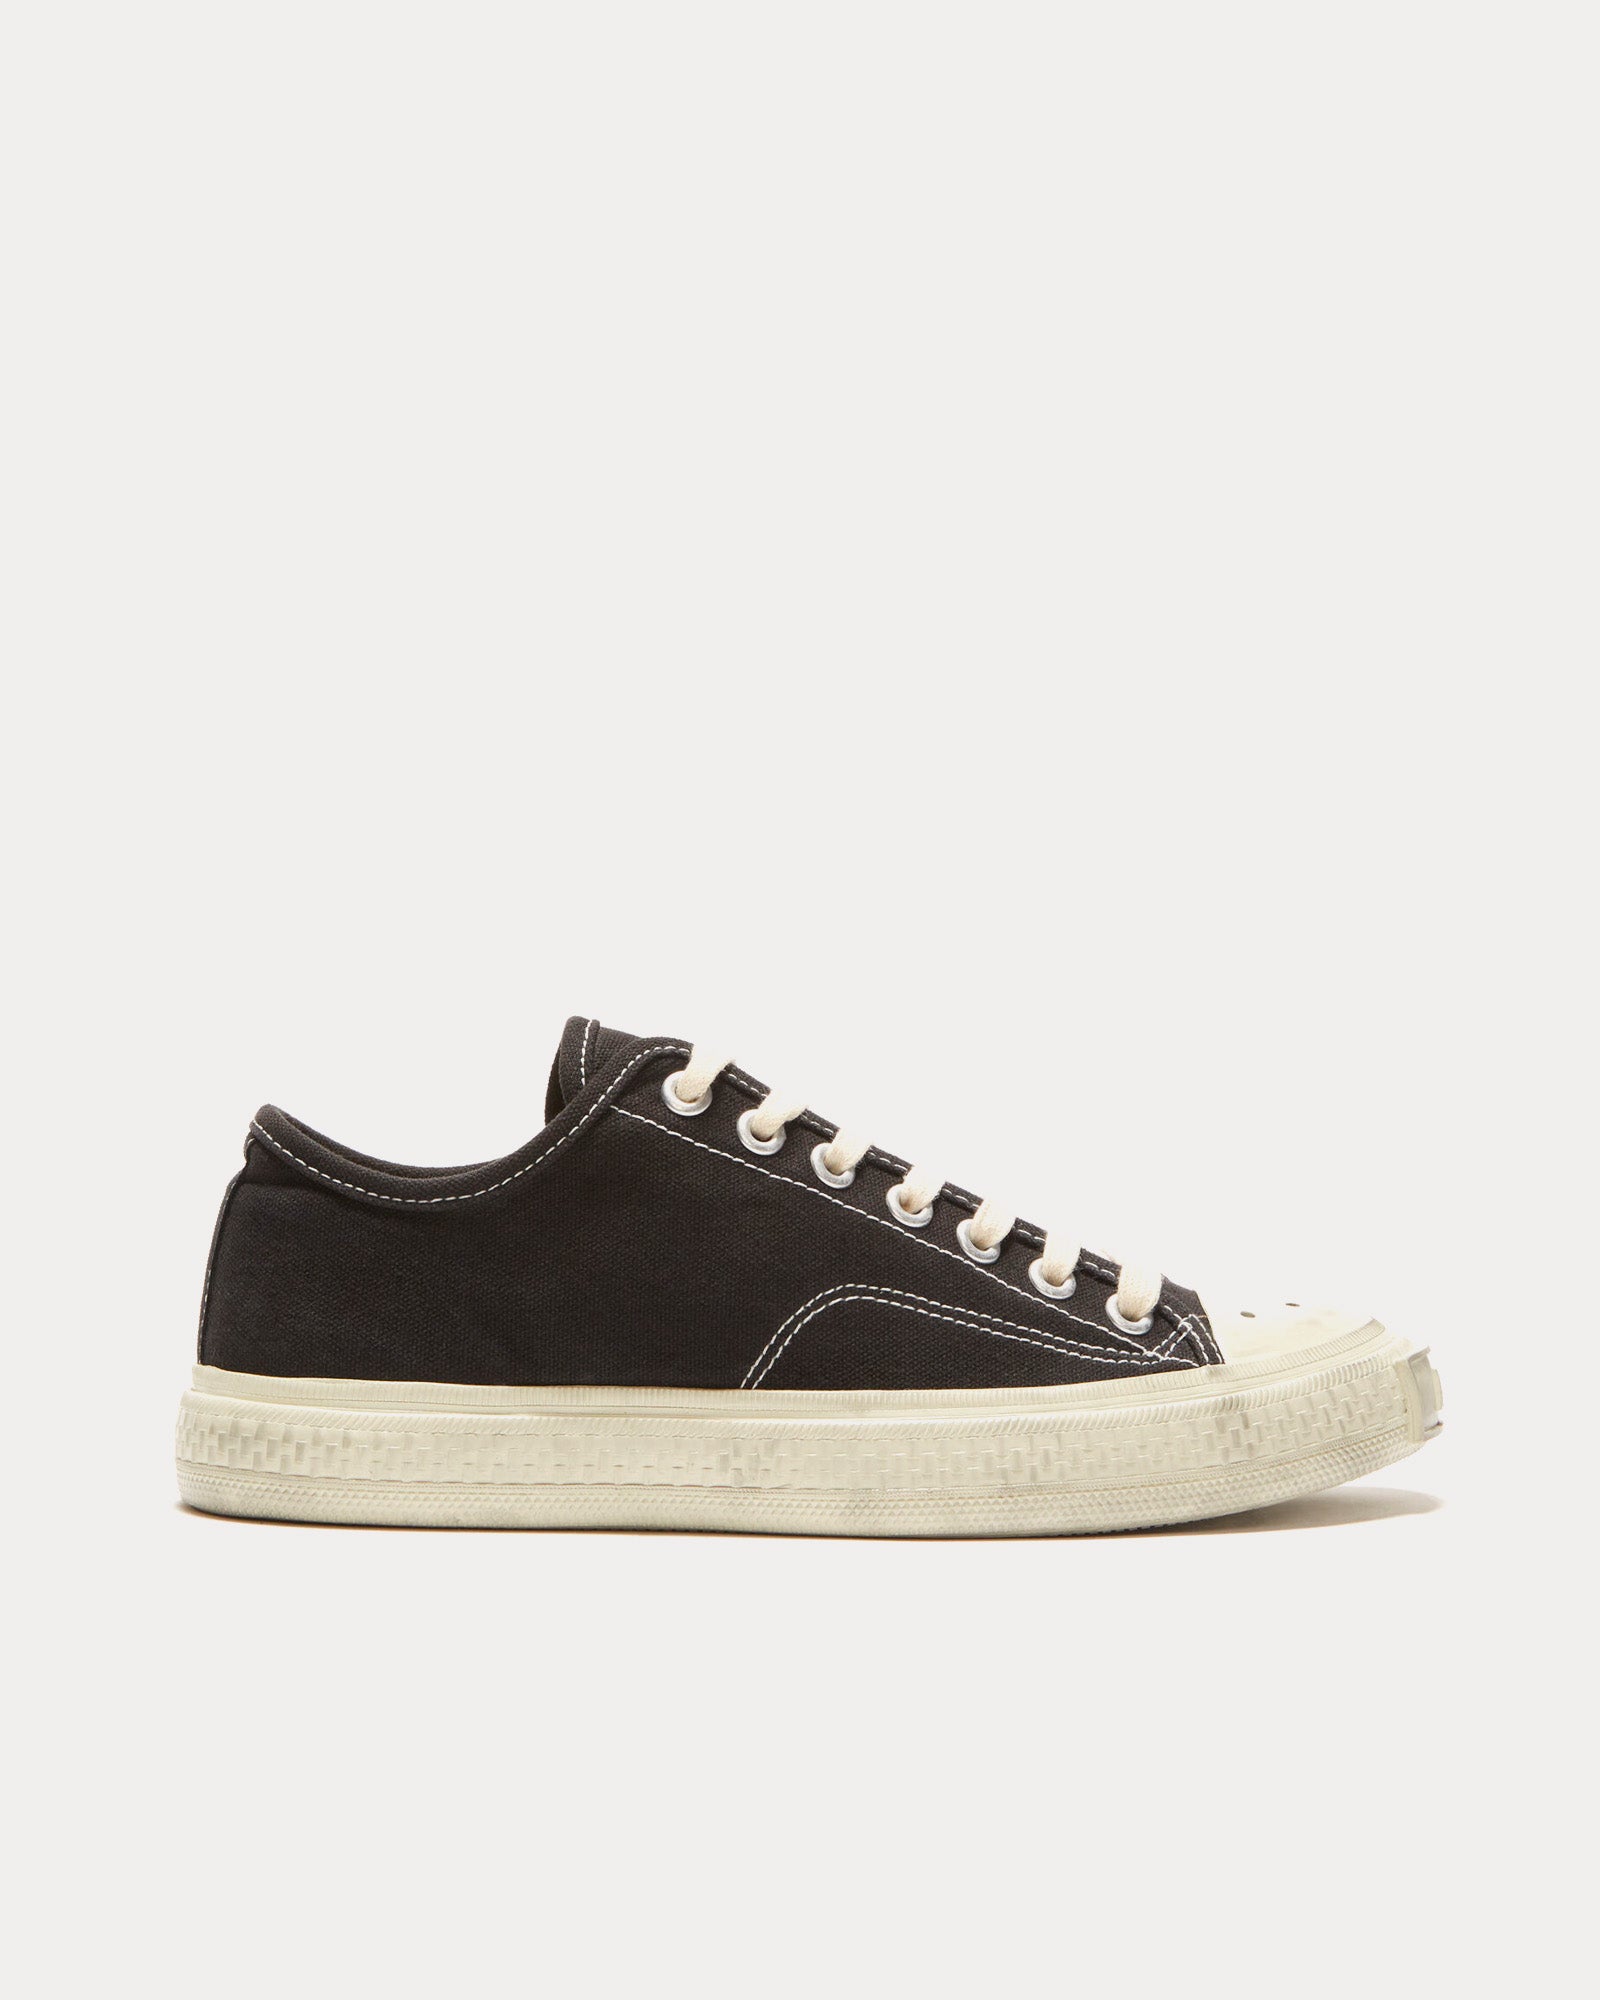 Acne Studios - Ballow Soft Tumbled Black / Off White Low Top Sneakers